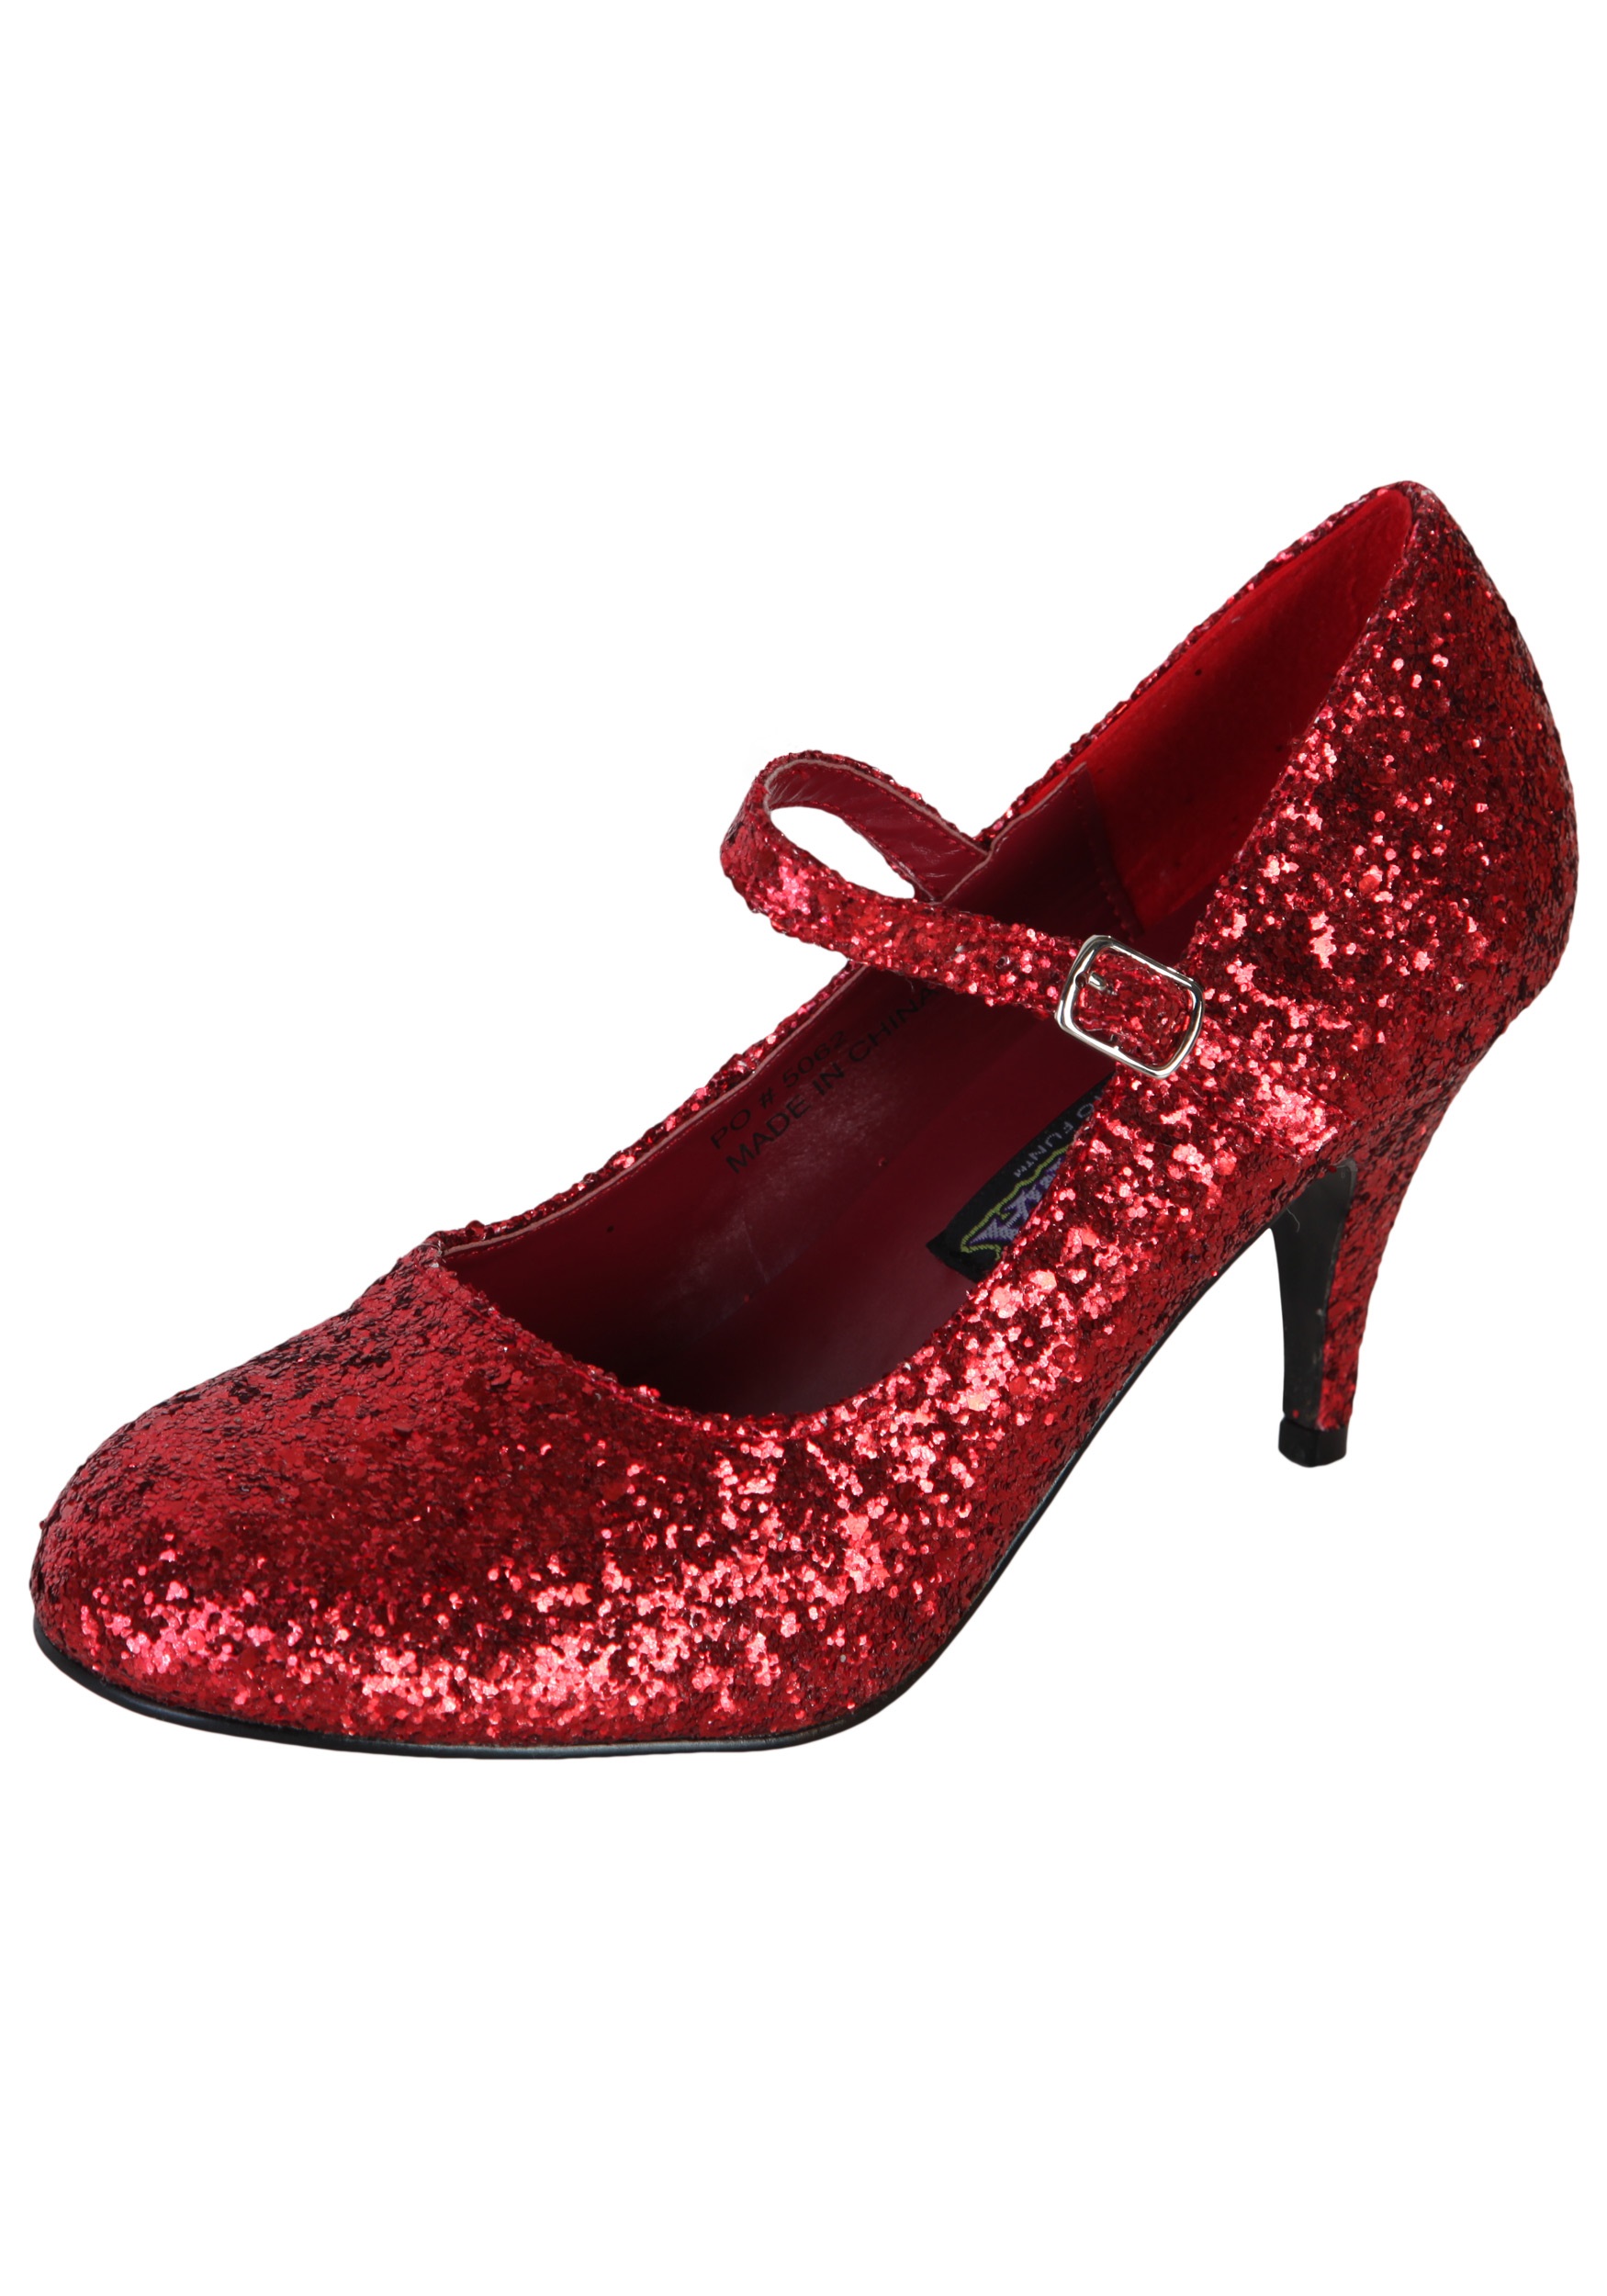 Sexy Red Glitter Shoes